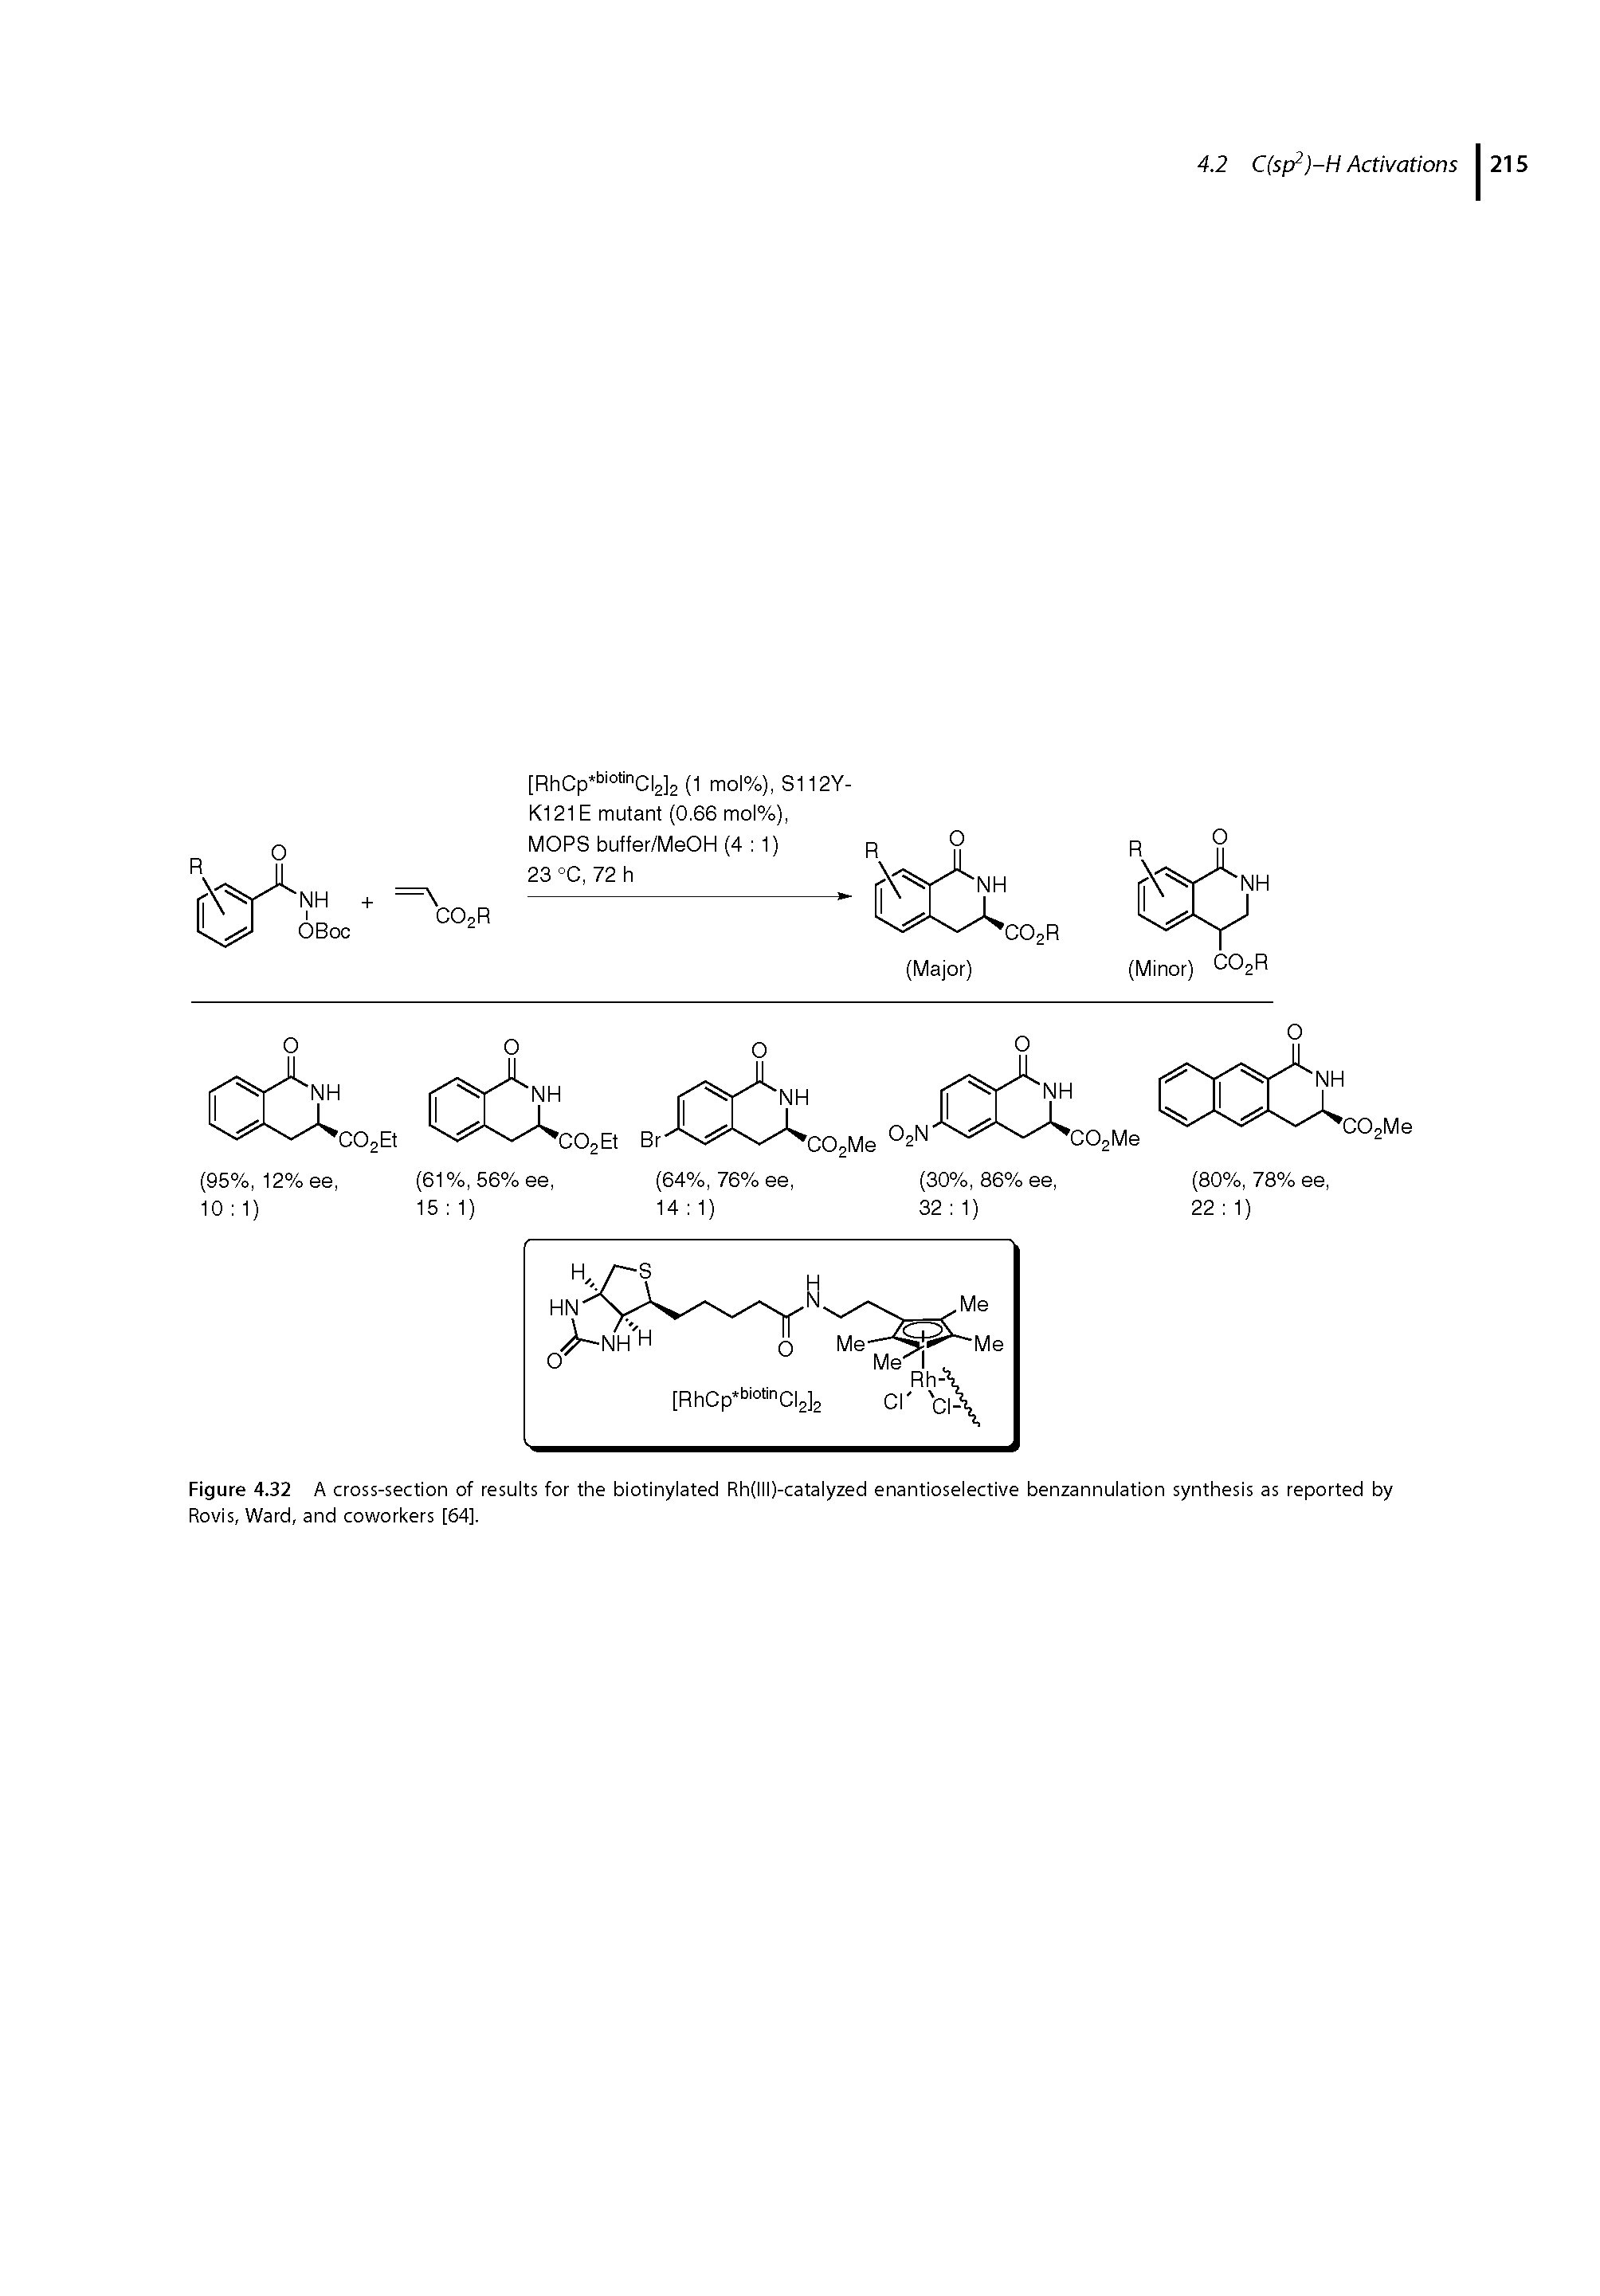 Figure 4.32 A cross-section of results for the biotinylated Rh(lll)-catalyzed enantioselective benzannulation synthesis as reported by Rovis, Ward, and coworkers [64].